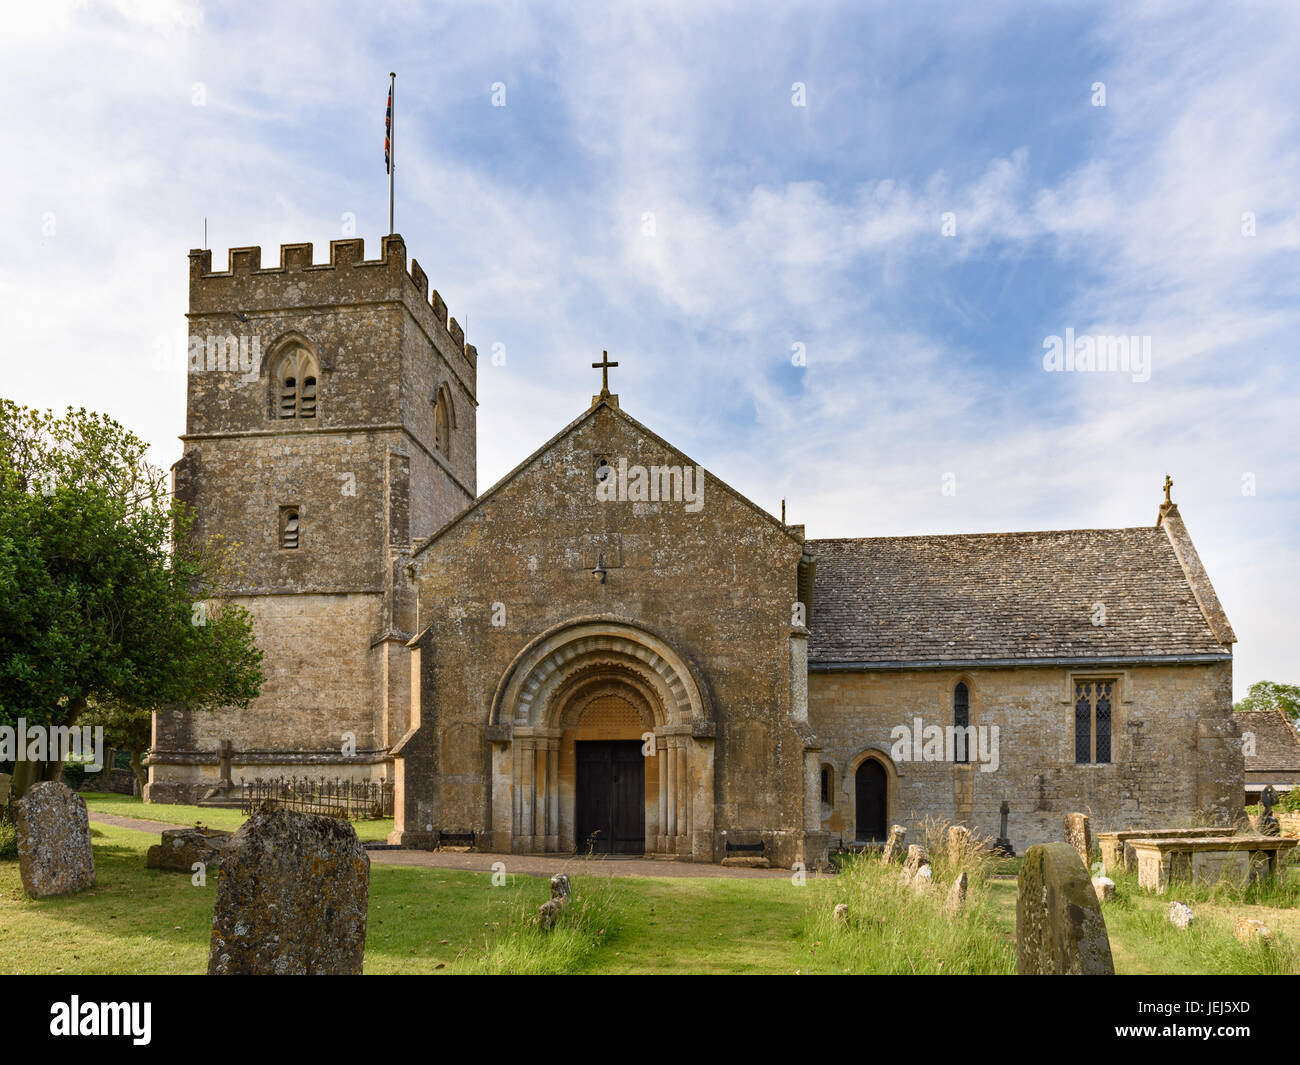 St Michael's and All Angels Church, Guiting Power, Cotswolds, UK Stock Photo